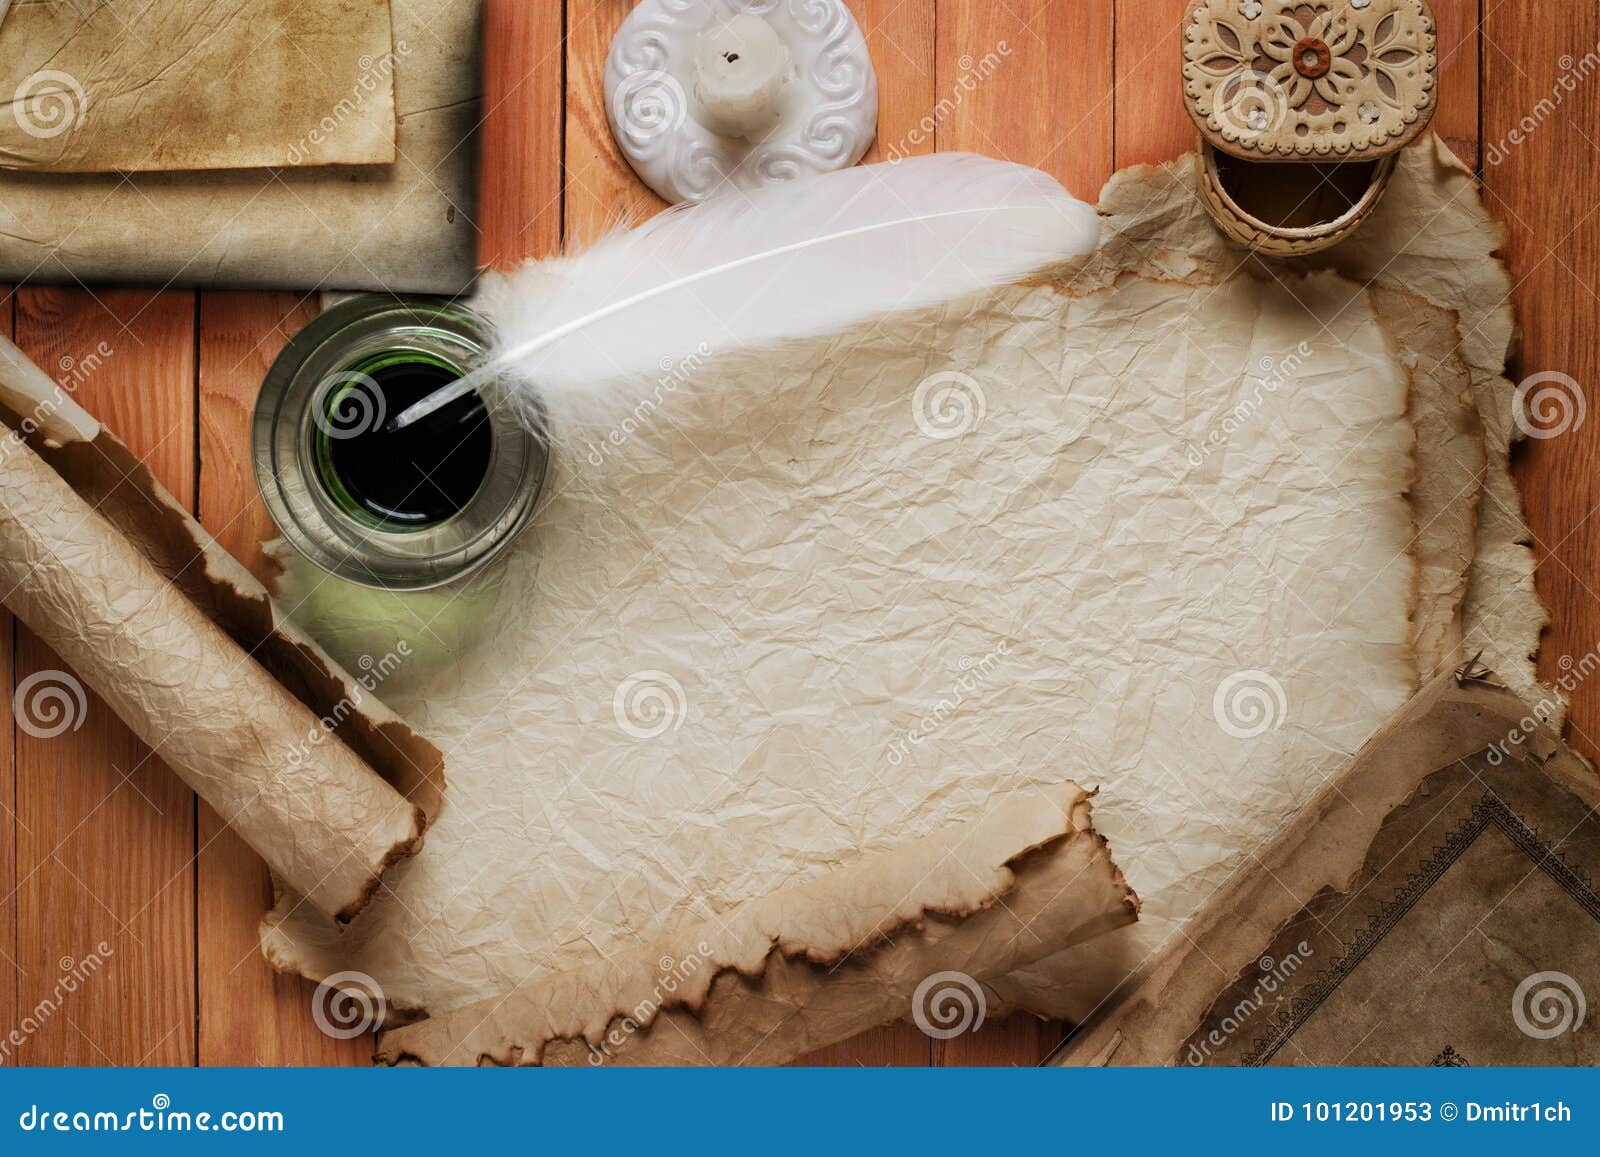 Parchment Paper And Brown Feather Quill Stock Photo - Download